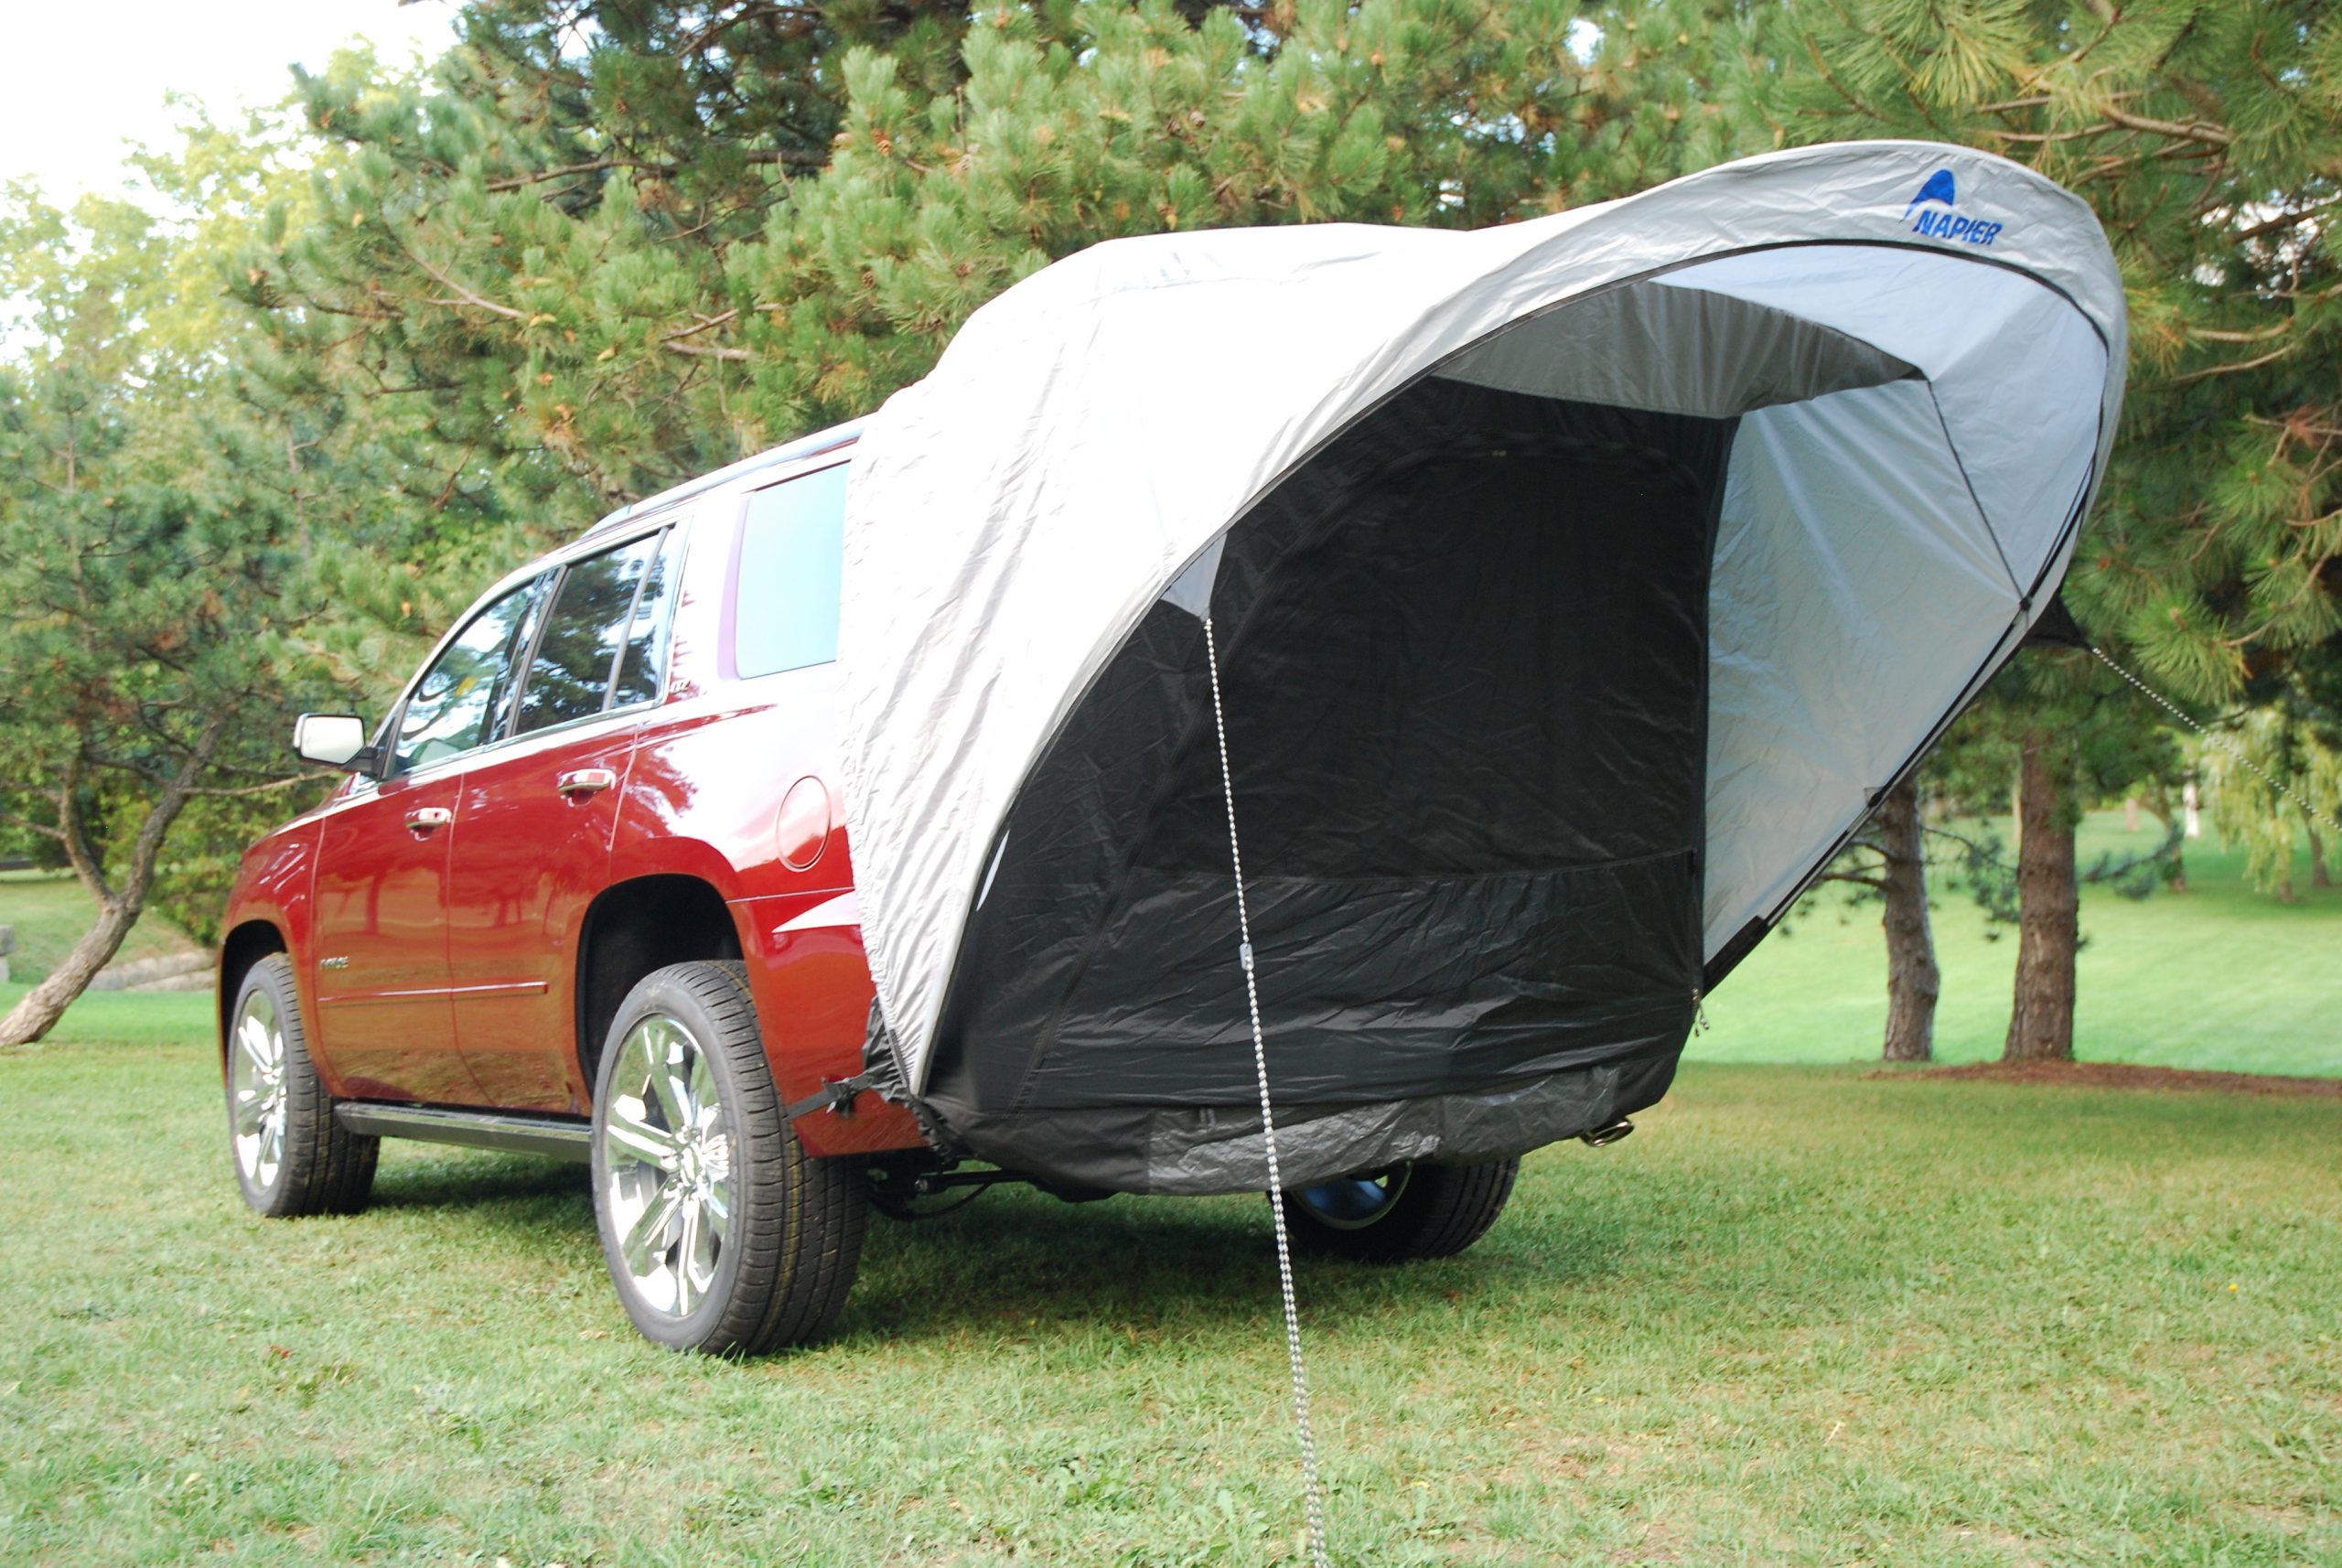 Napier 61500 Sportz Cove Mid to Full-Sized SUV's & CUV's awning minivan shade 